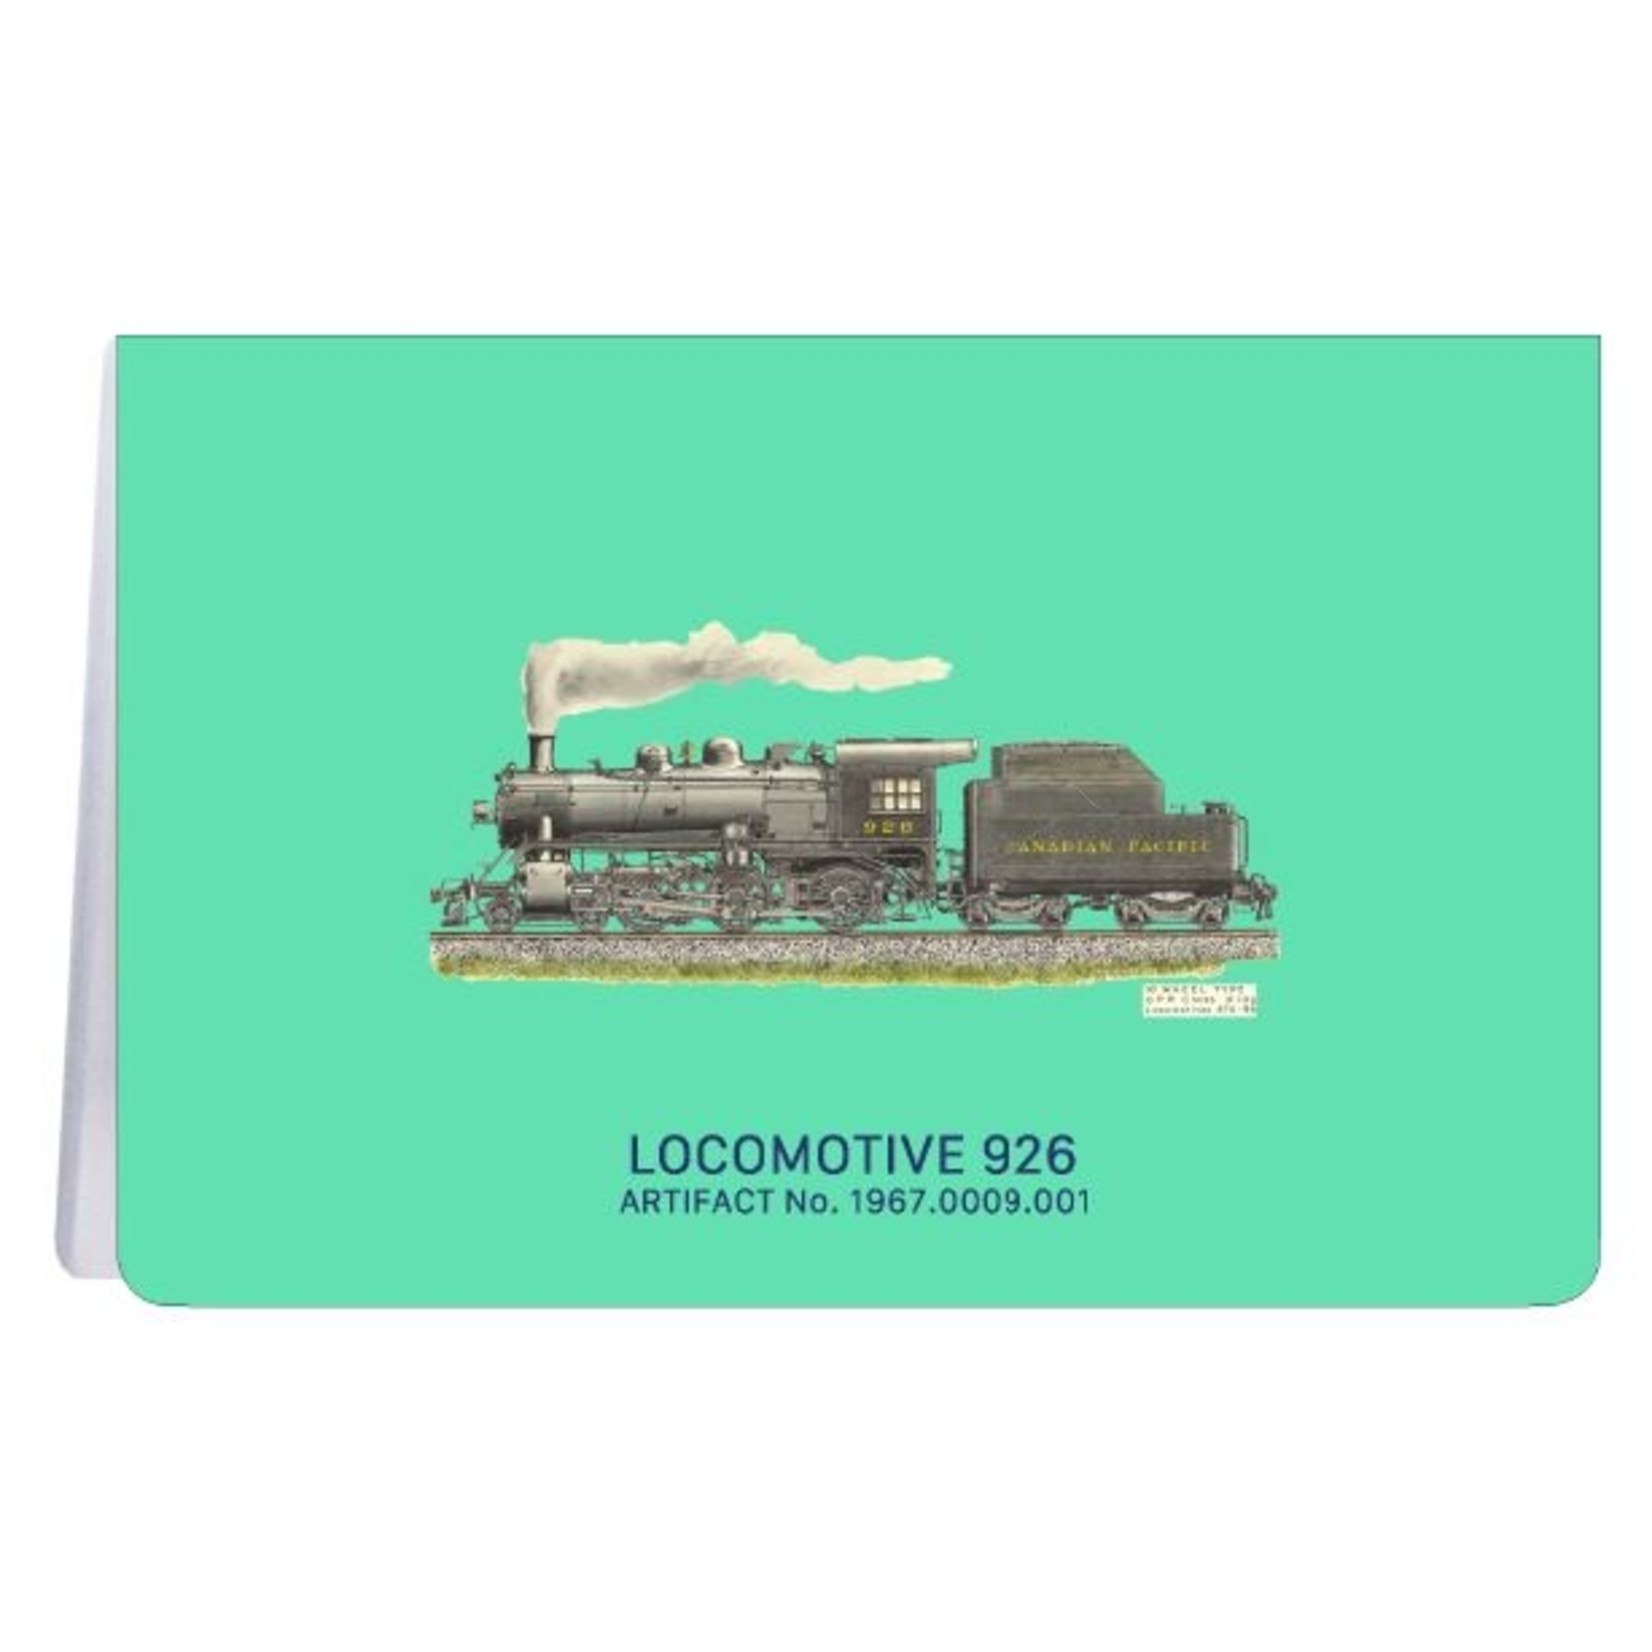 Science and Technology Locomotive 926 - Soft Cover Notebook